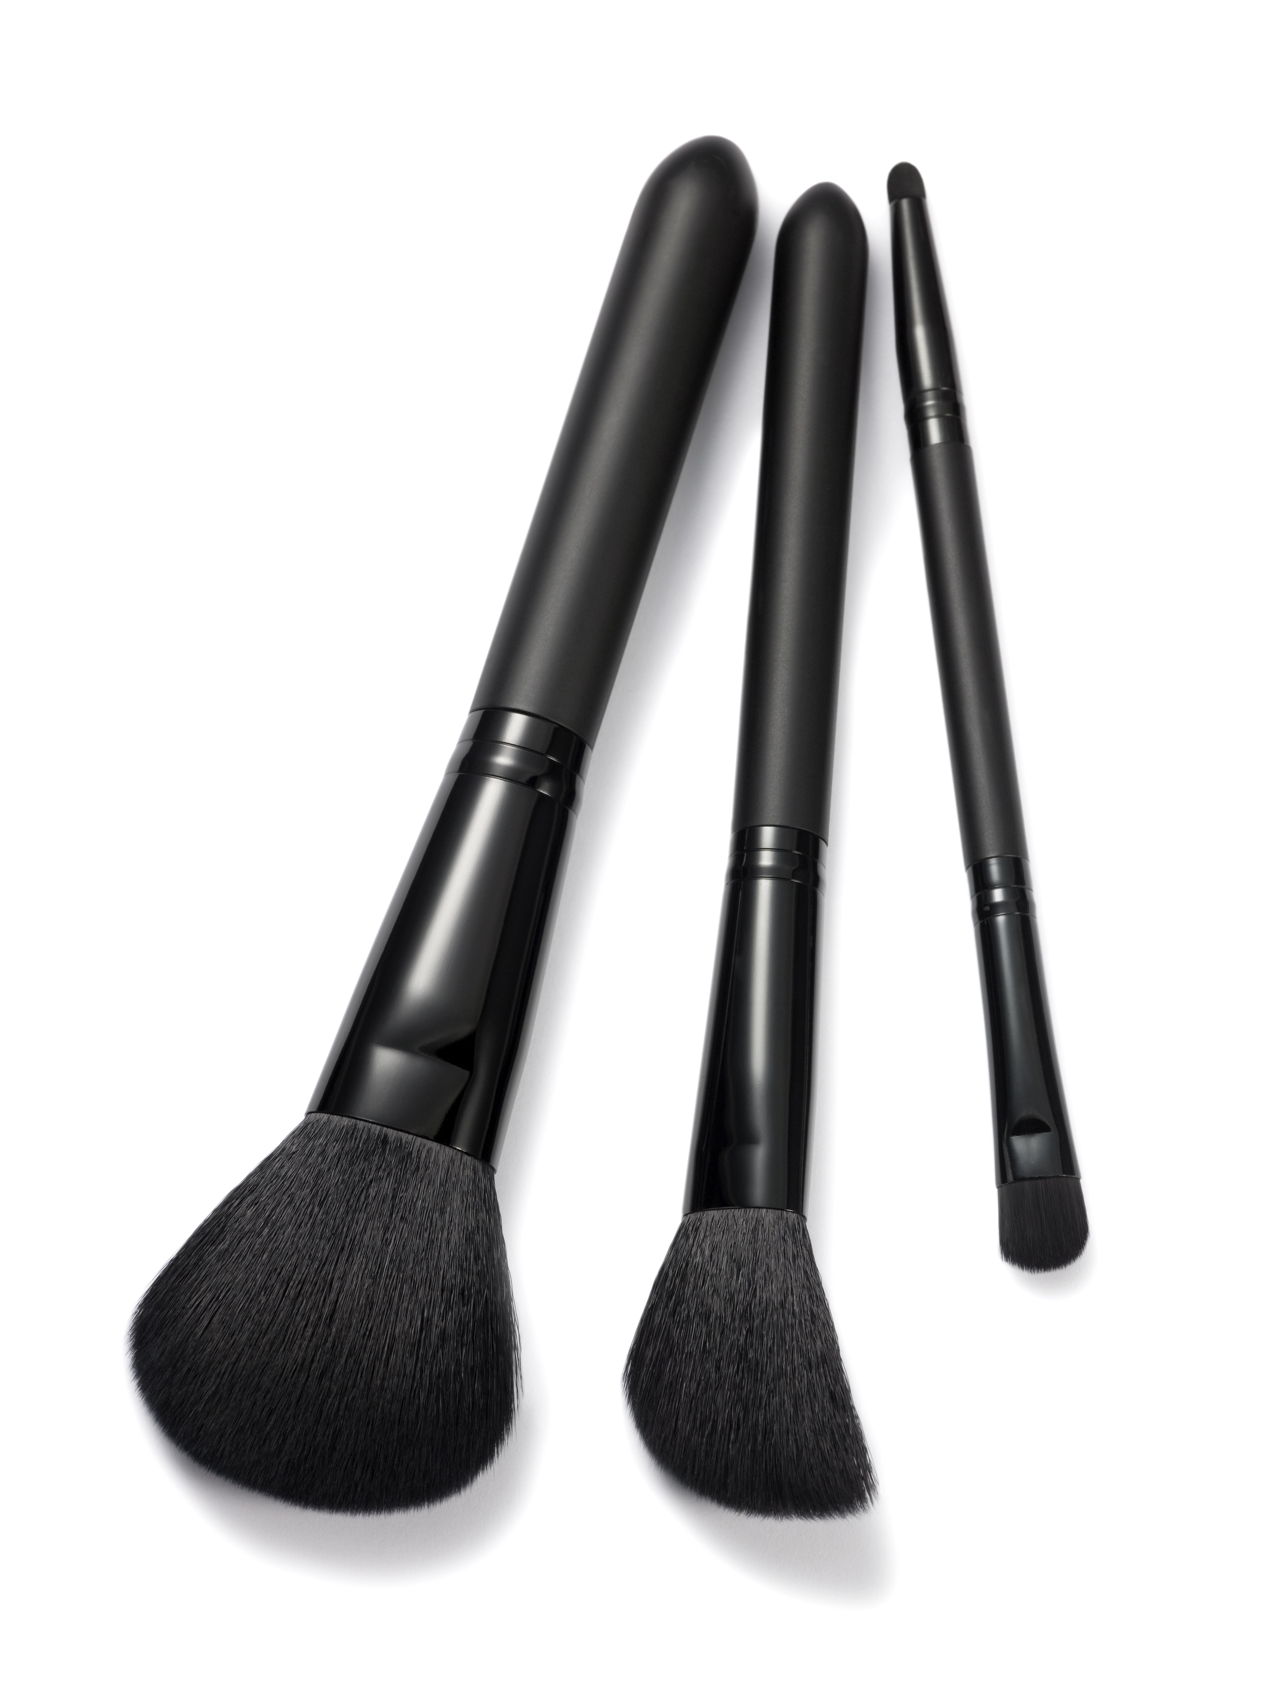 Best Brushes for Mineral Makeup